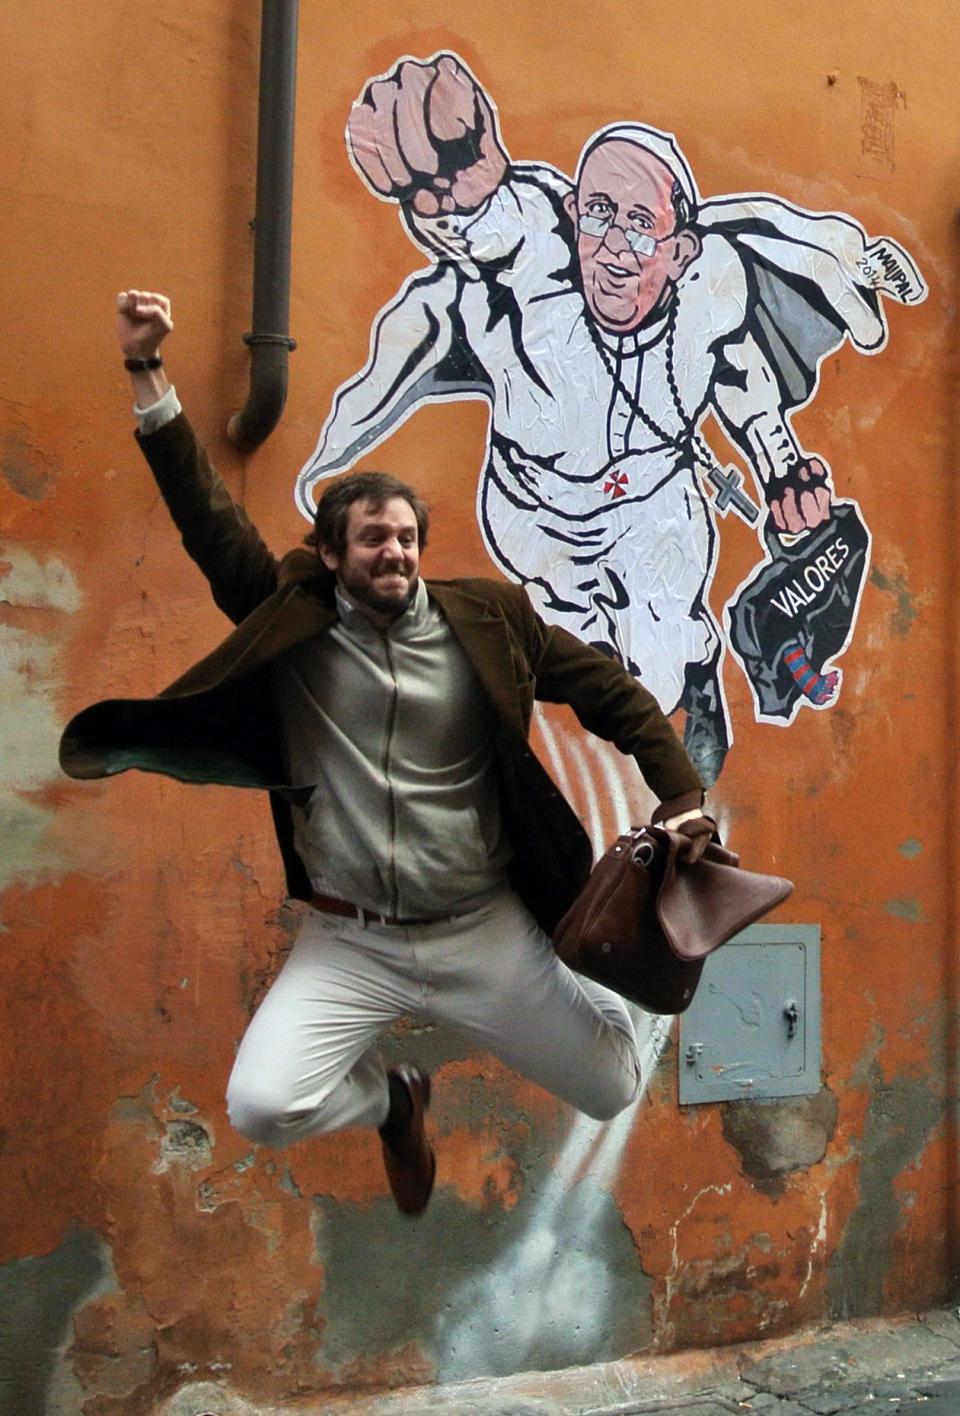 FILE - In this Wednesday, Jan. 29, 2014 file photo, a tourist jumps as poses for a souvenir picture in front of a graffiti by Italian artist Mauro Pallotta depicting Pope Francis as Superman and holding a bag with a writing which reads: "Values" at the Borgo Pio district near St. Peter's Square in Rome. Pope Francis’ status as a superhero has bit the dust. Rome’s decorum police early Thursday, Jan. 30, 2014, scrubbed the wall near the Vatican where “SuperPope” had been displayed, showing Francis as Superman in flight and clutching his black satchel of values to spread to the world. Artist Mauro Pallotta had put the image up on Monday in homage to Francis. Pallotta’s agent, Margaret Porpiglia said Thursday the artist is now hoping to avoid a city fine but is considering making a street art piece depicting the “anti-hero” Rome Mayor Ignazio Marino. The white caped crusader pope, which was actually painted on paper and affixed to the wall with water-based glue, had drawn immense popular interest around the Borgo neighborhood of tiny cobble stoned streets near St. Peter’s Square. (AP Photo/Gregorio Borgia, File)